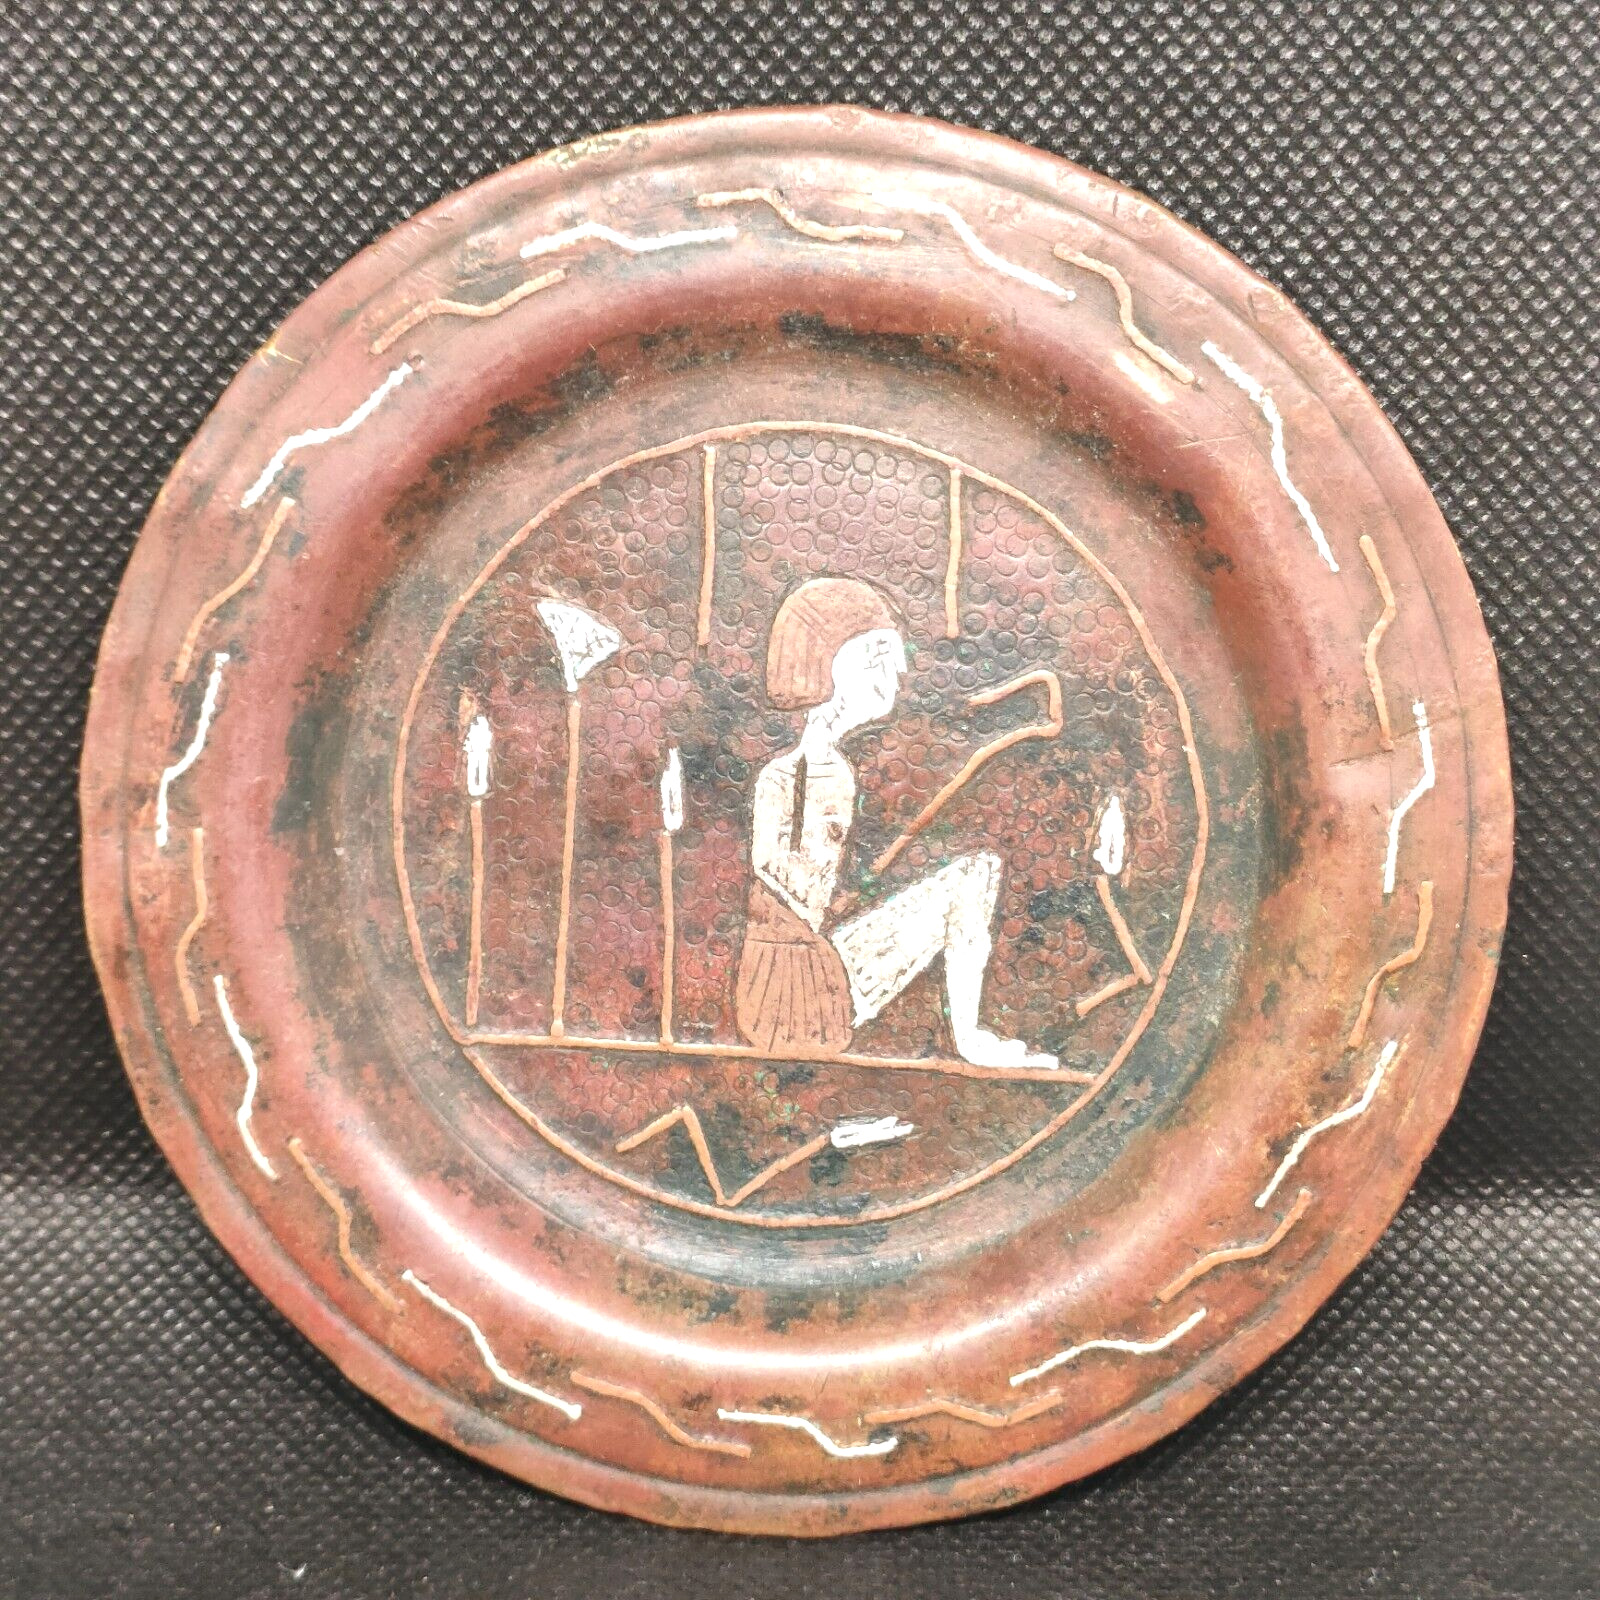 RARE Old Islamic Hammered Copper Trinket Dish Vintage Cairo Islamic Items